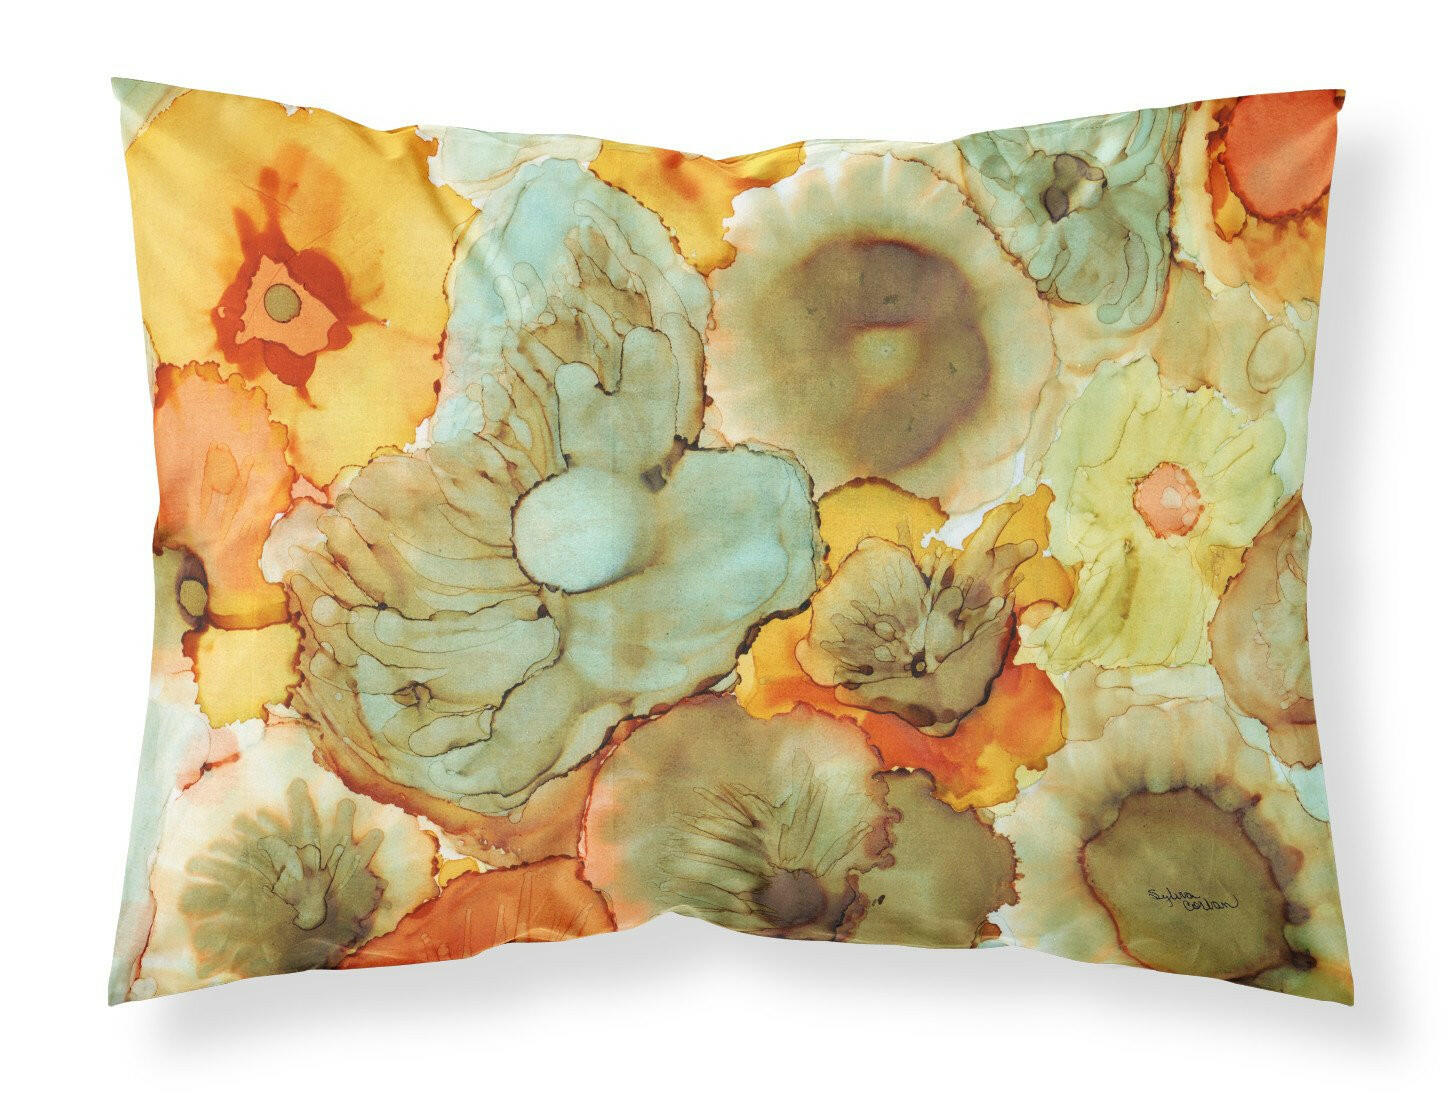 Abstract Flowers Teal and orange Fabric Standard Pillowcase 8959PILLOWCASE by Caroline's Treasures